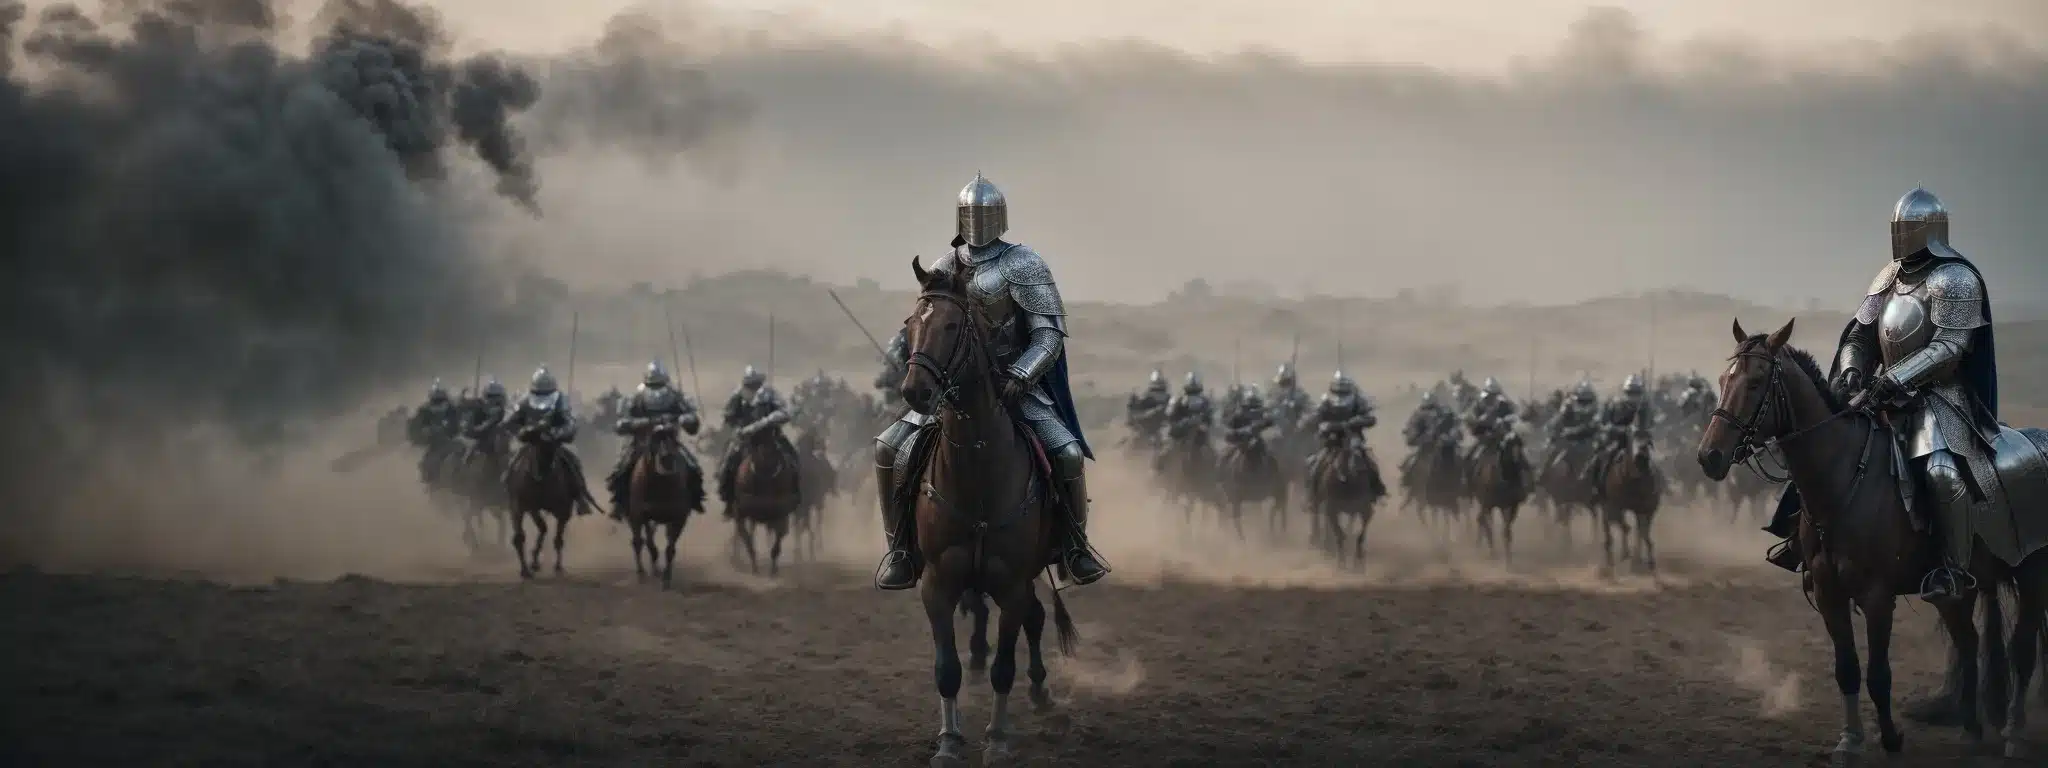 A Knight In Gleaming Armor Stands At The Forefront Of A Battlefield, Poised And Ready Amidst The Blur Of Rival Forces.